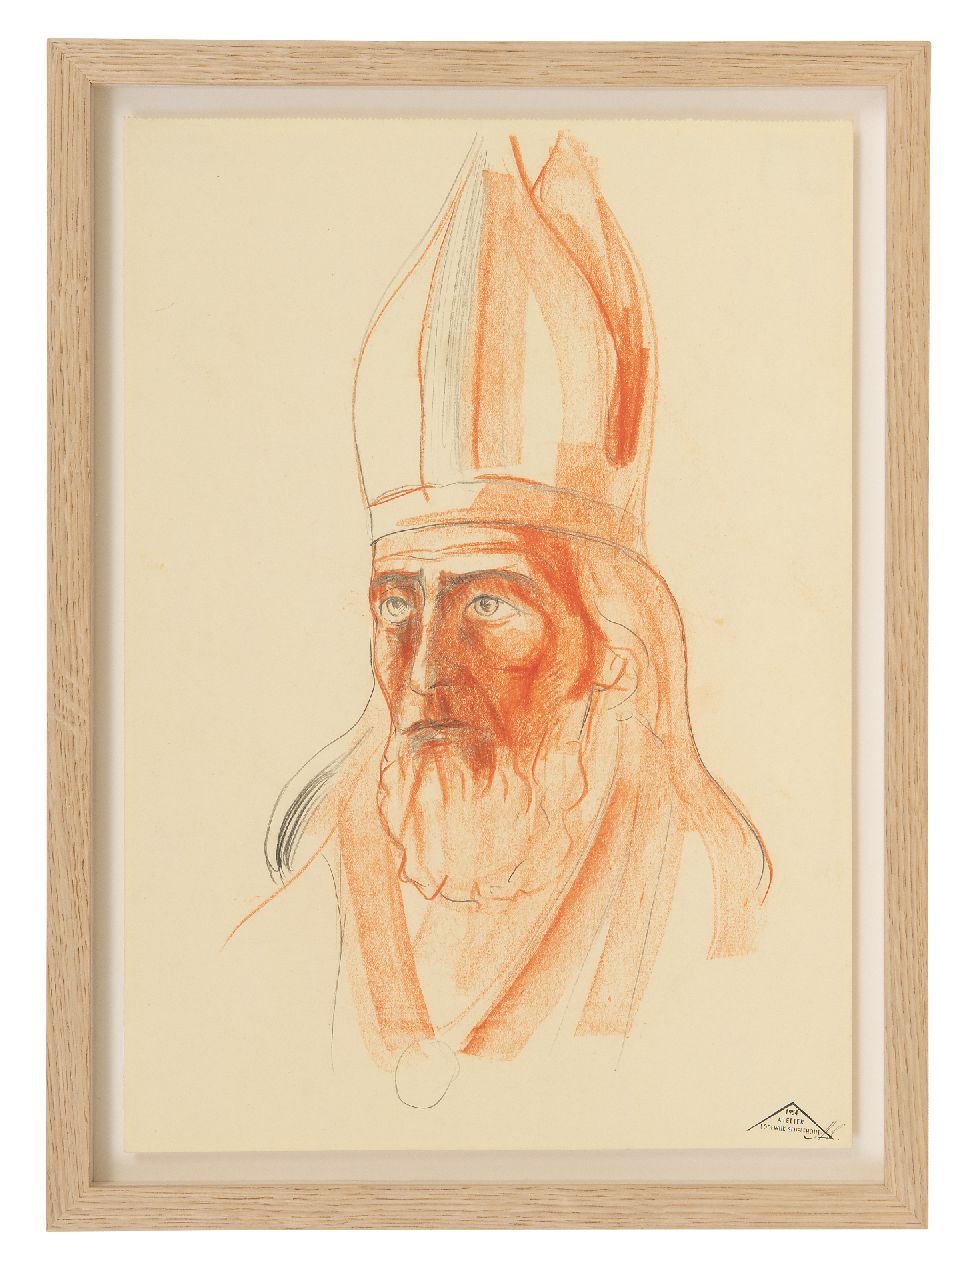 Schelfhout L.  | Lodewijk Schelfhout | Watercolours and drawings offered for sale | Portrait of a saint wearing a mitre, pencil and chalk on paper 34.0 x 20.0 cm